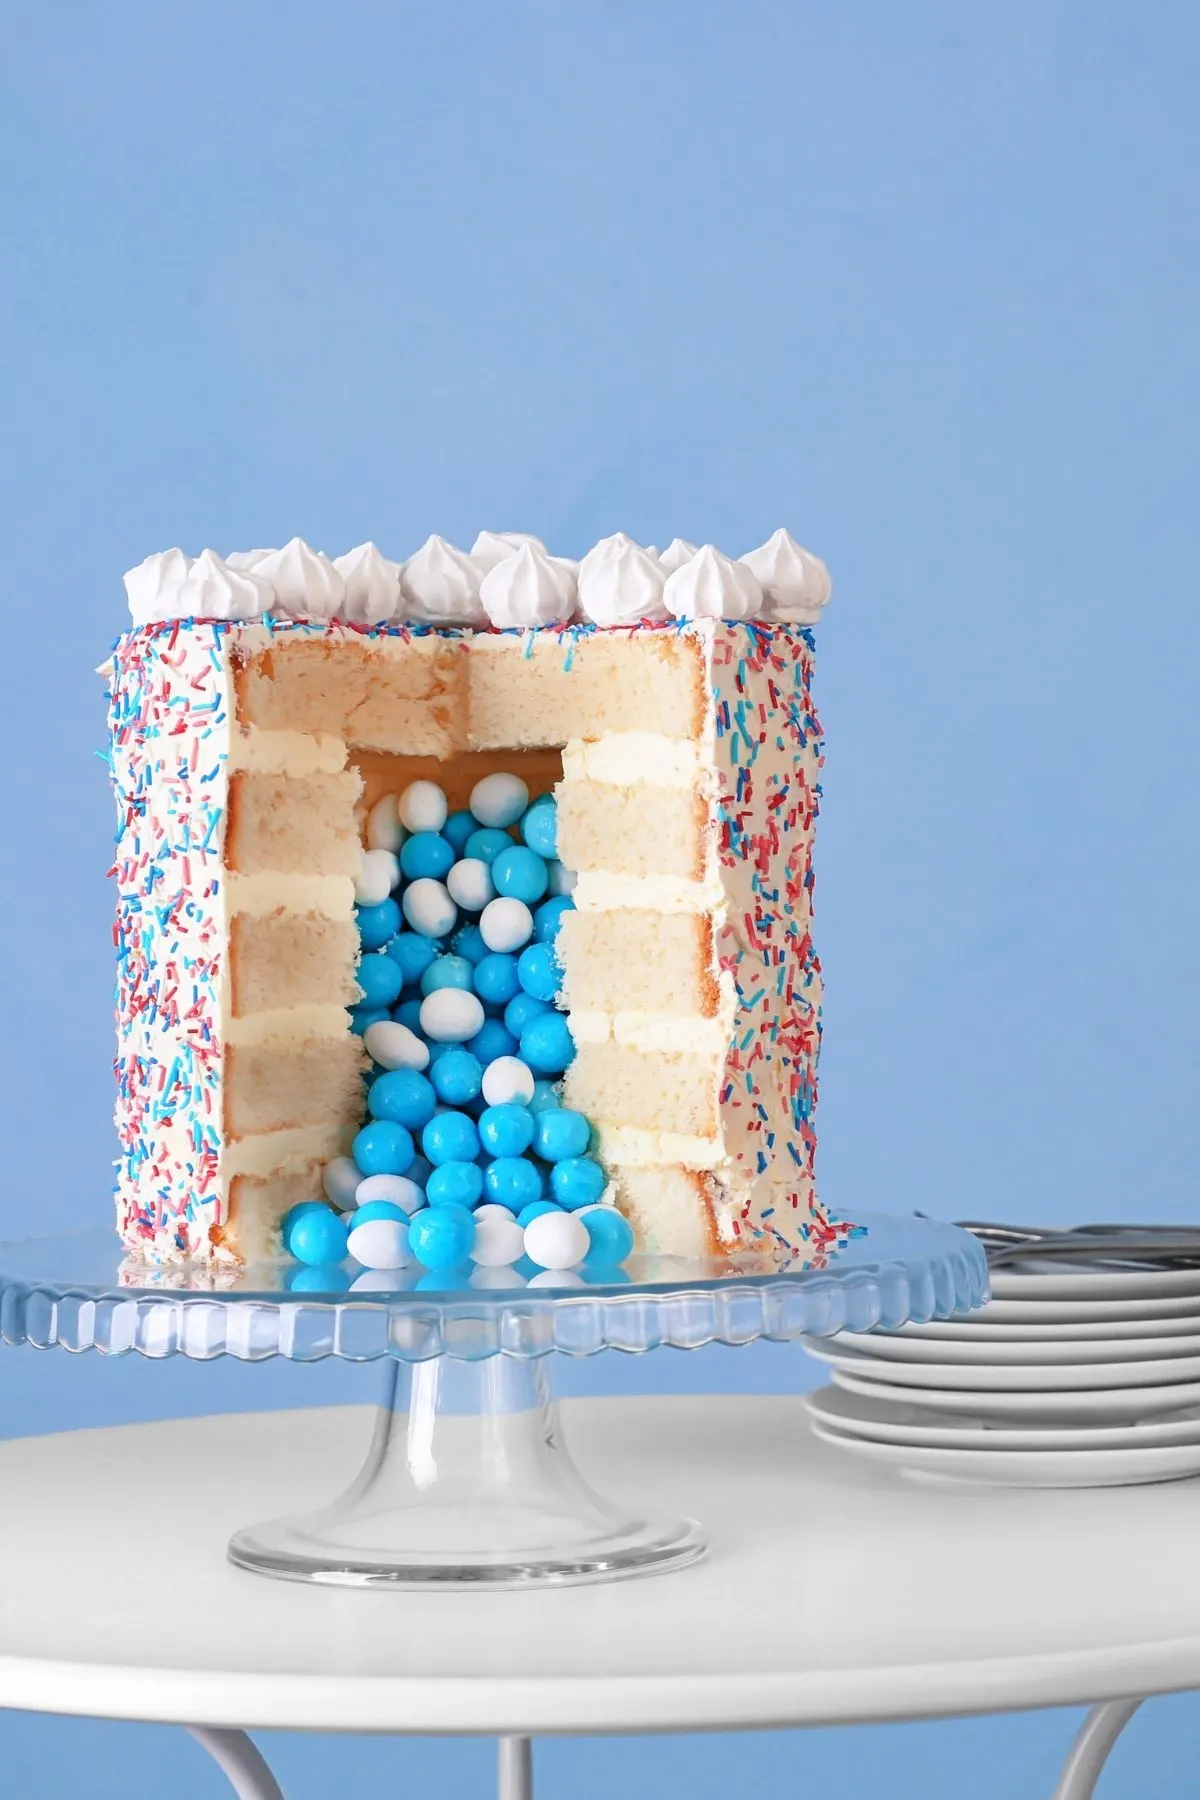 Blue candies spill from a cake with a large slice taken out of it.